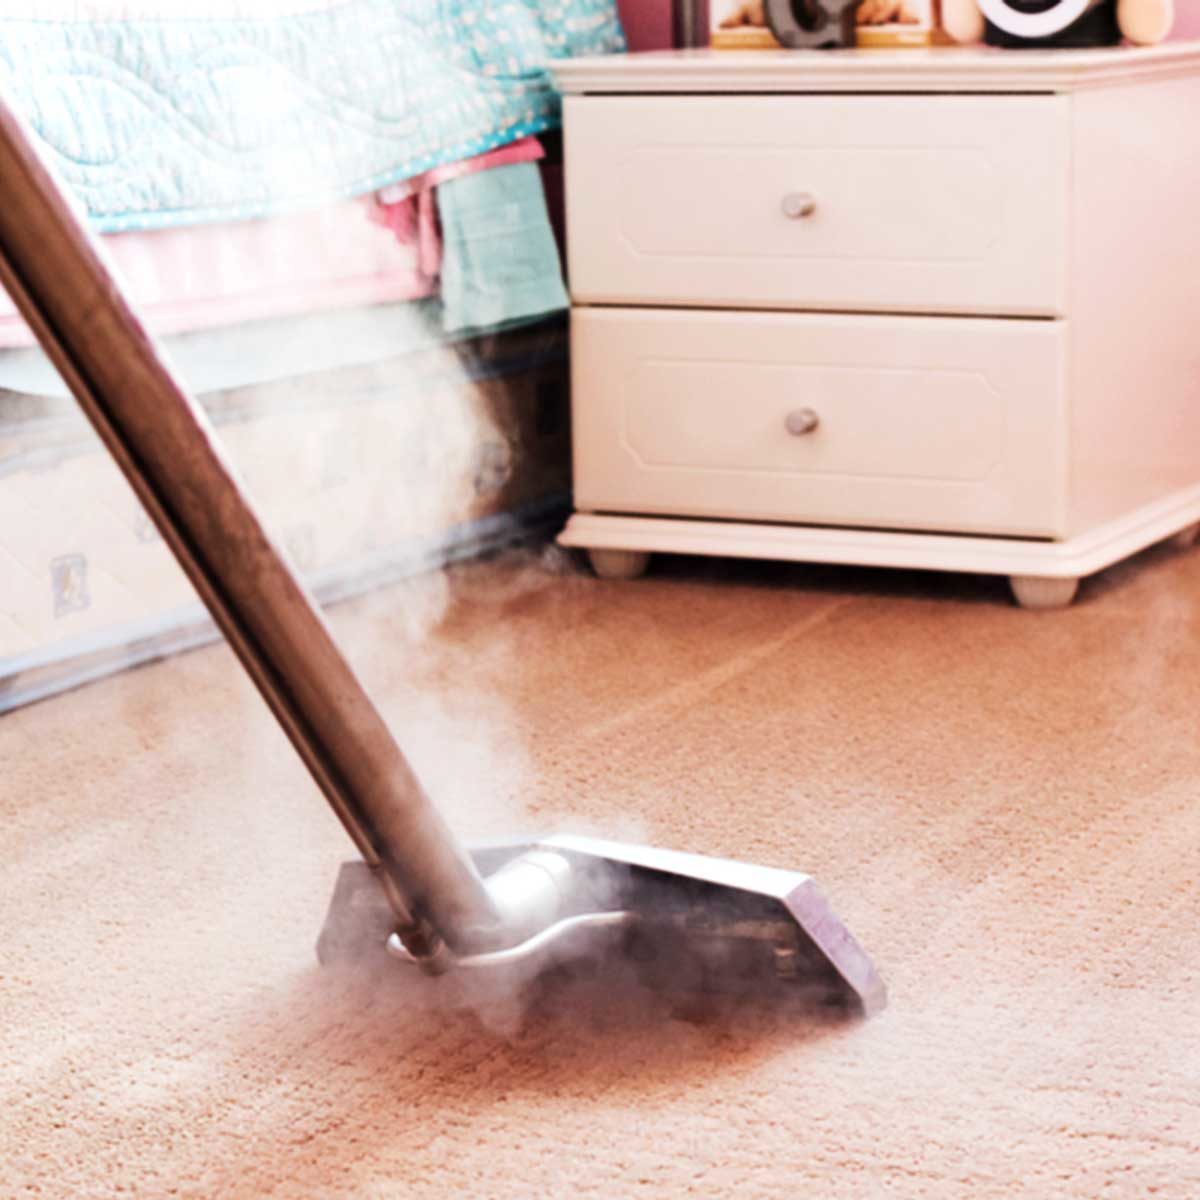 What to Know About Steam Cleaners